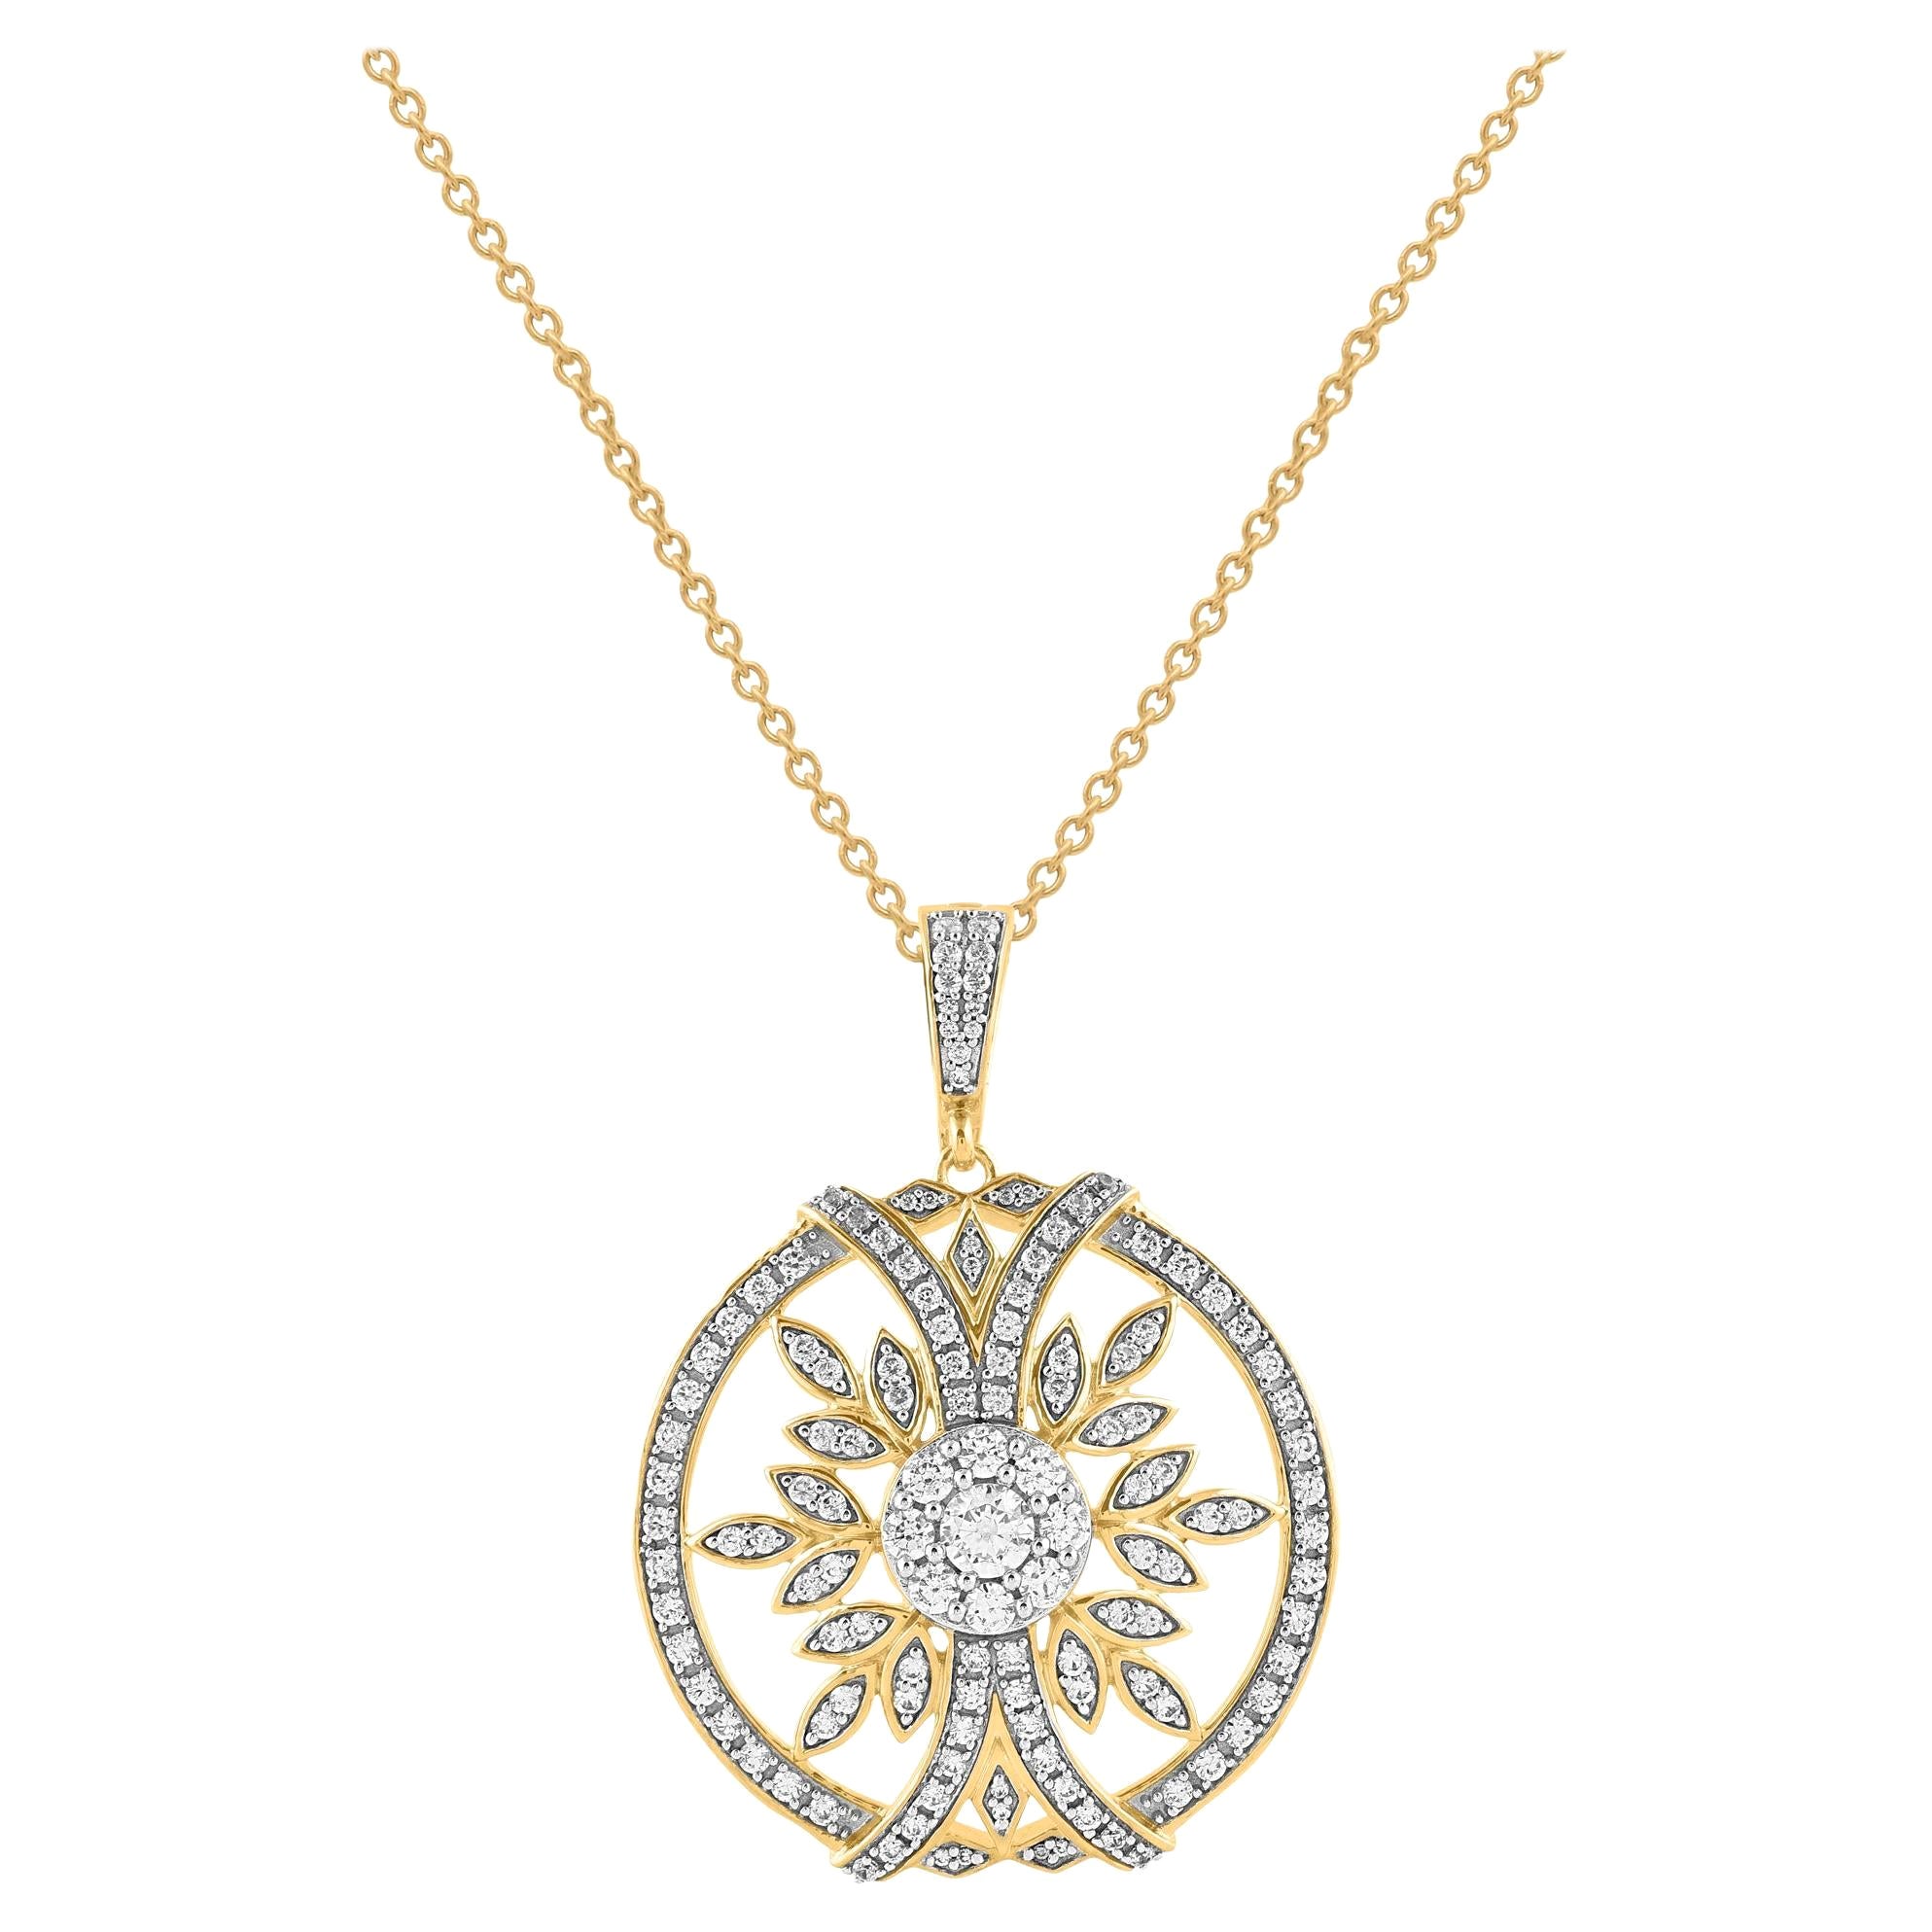 TJD 1.0 Carat Natural Round Diamond 18KT Yellow Gold Circle Cluster Necklace